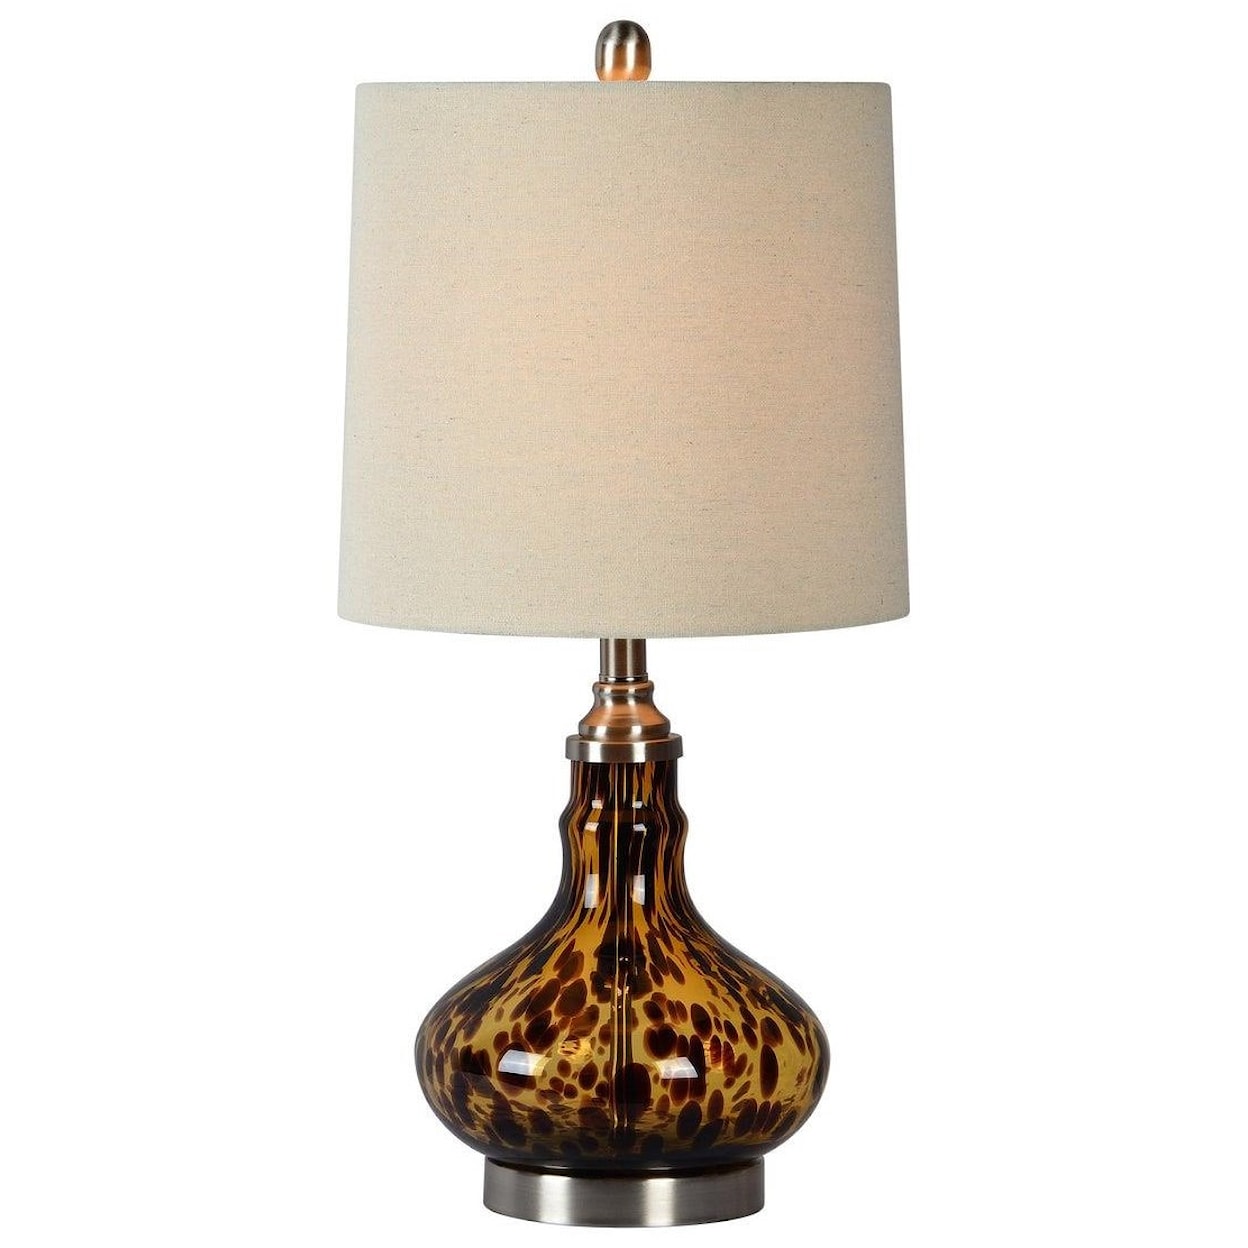 Forty West Designs Lamps NOELLE TABLE LAMP